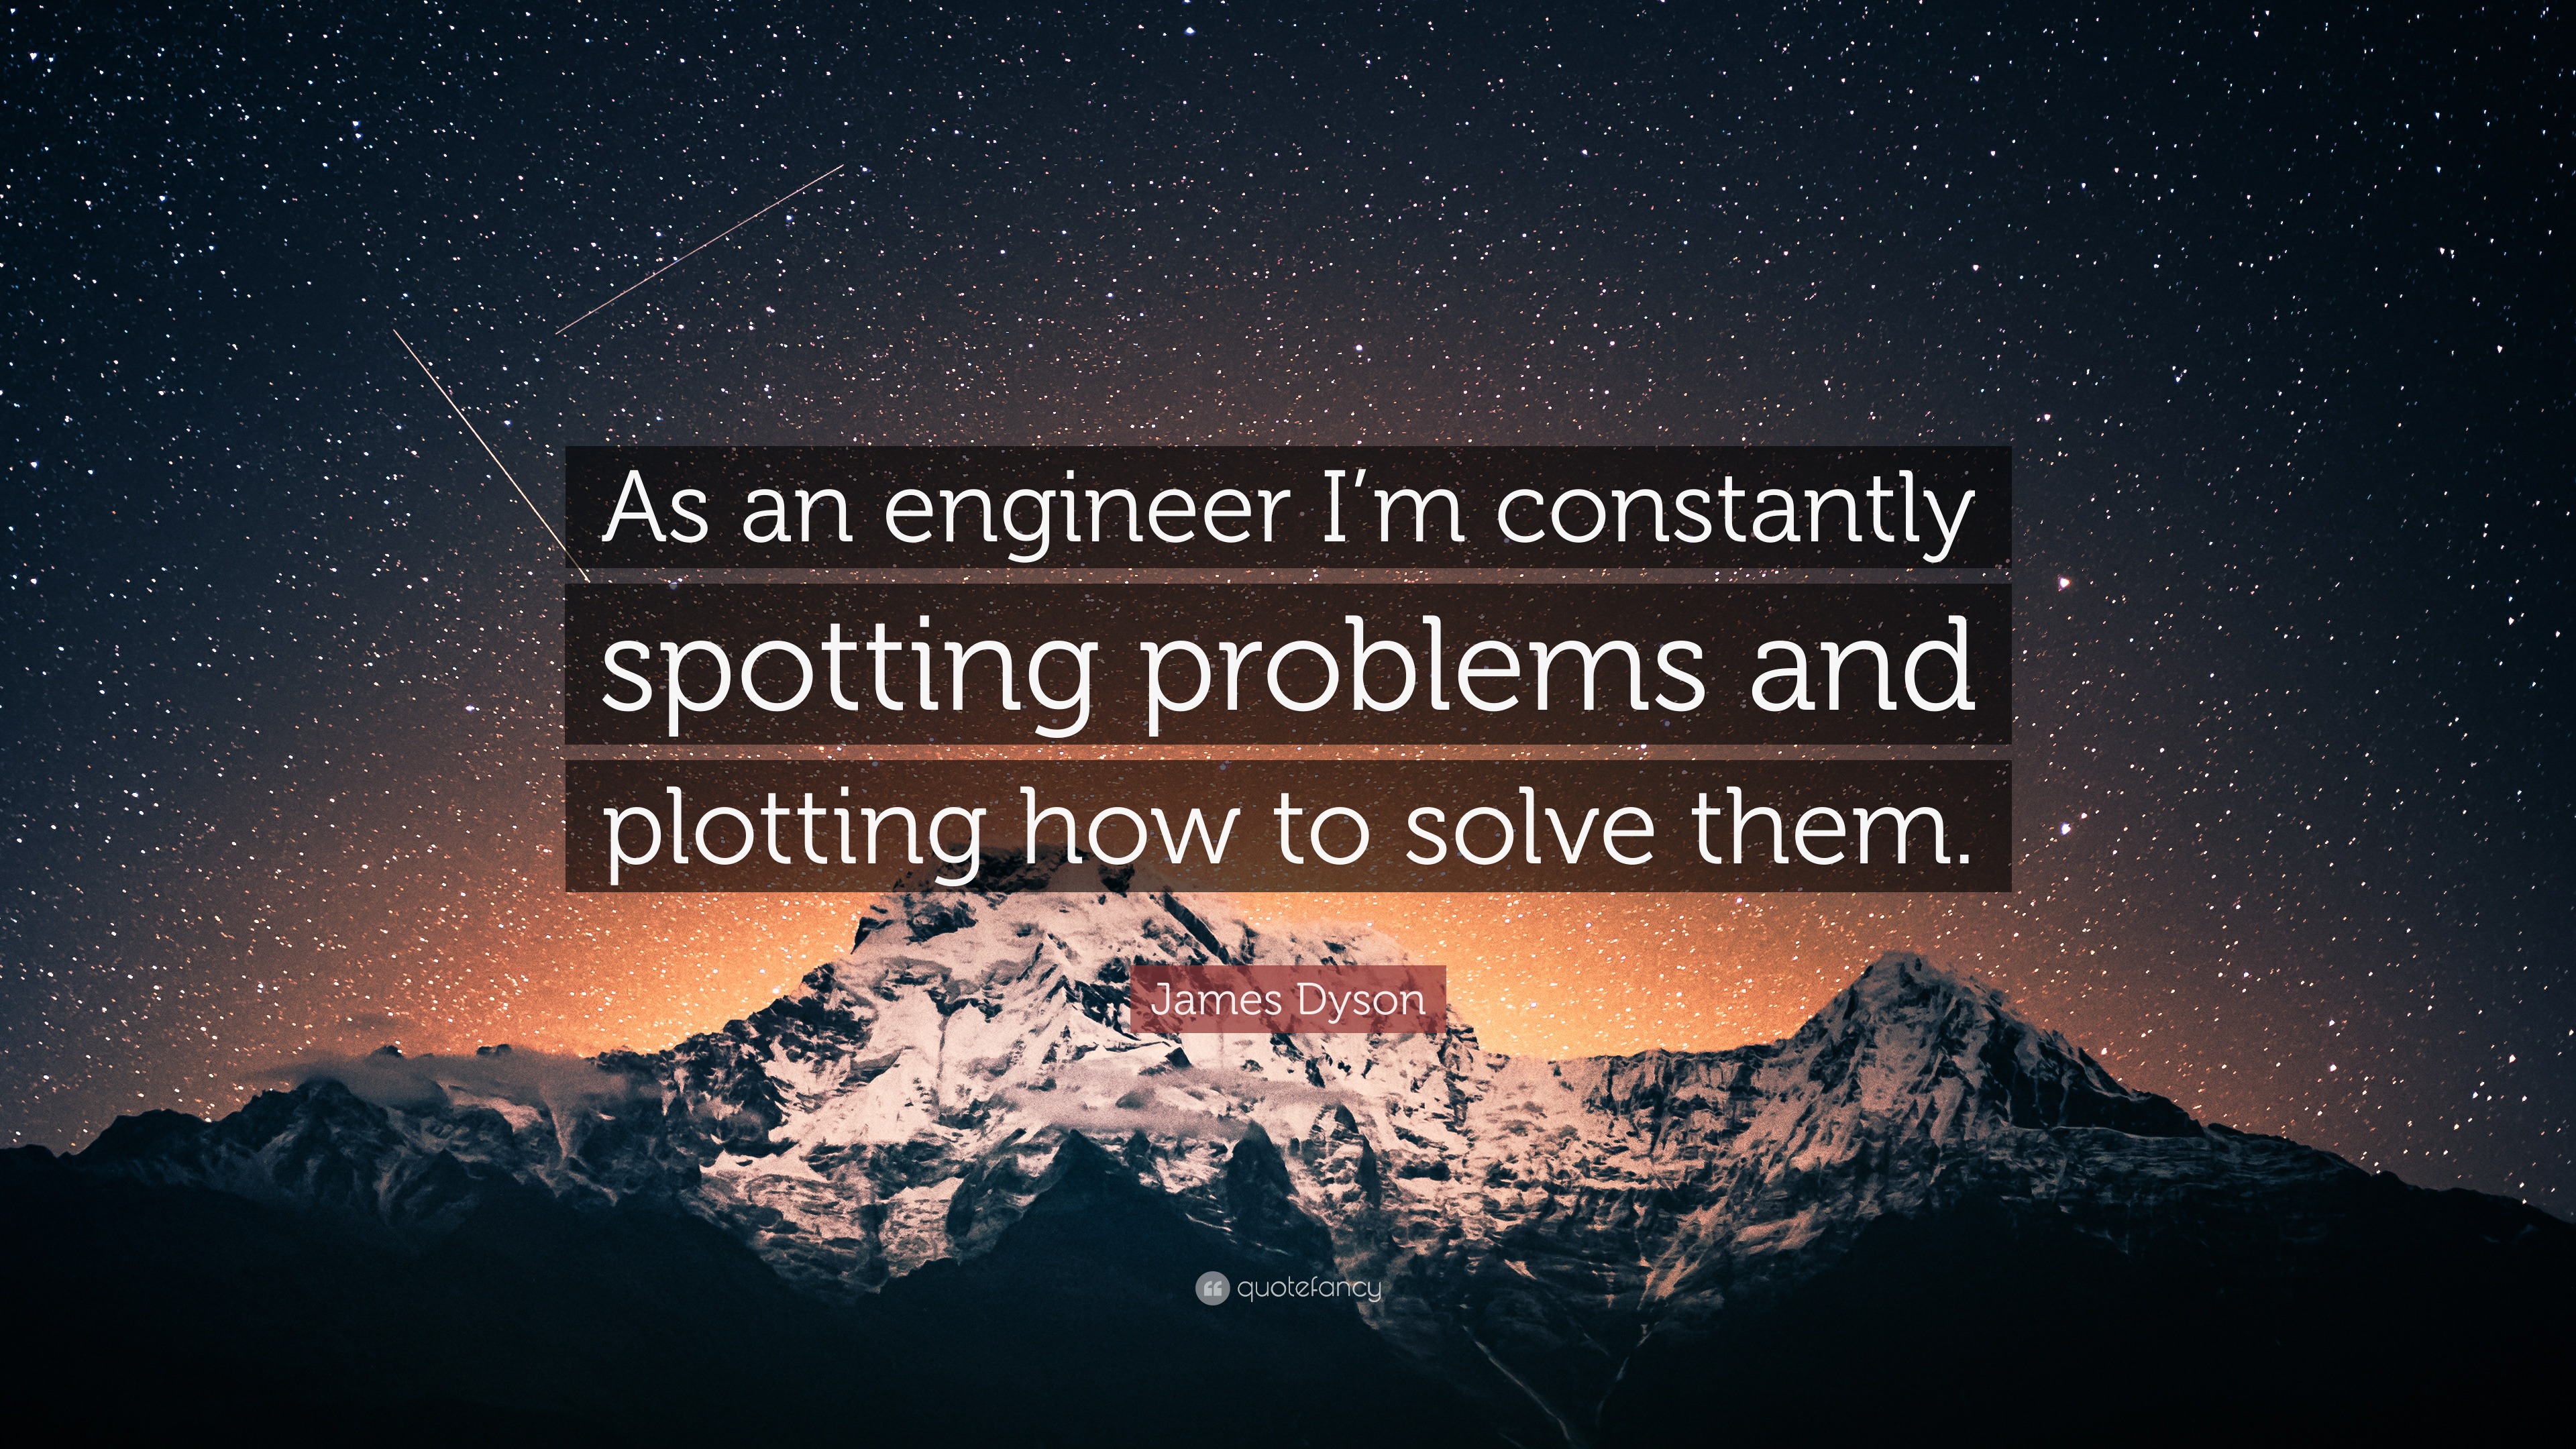 James Dyson Quote: “As an engineer I'm constantly spotting